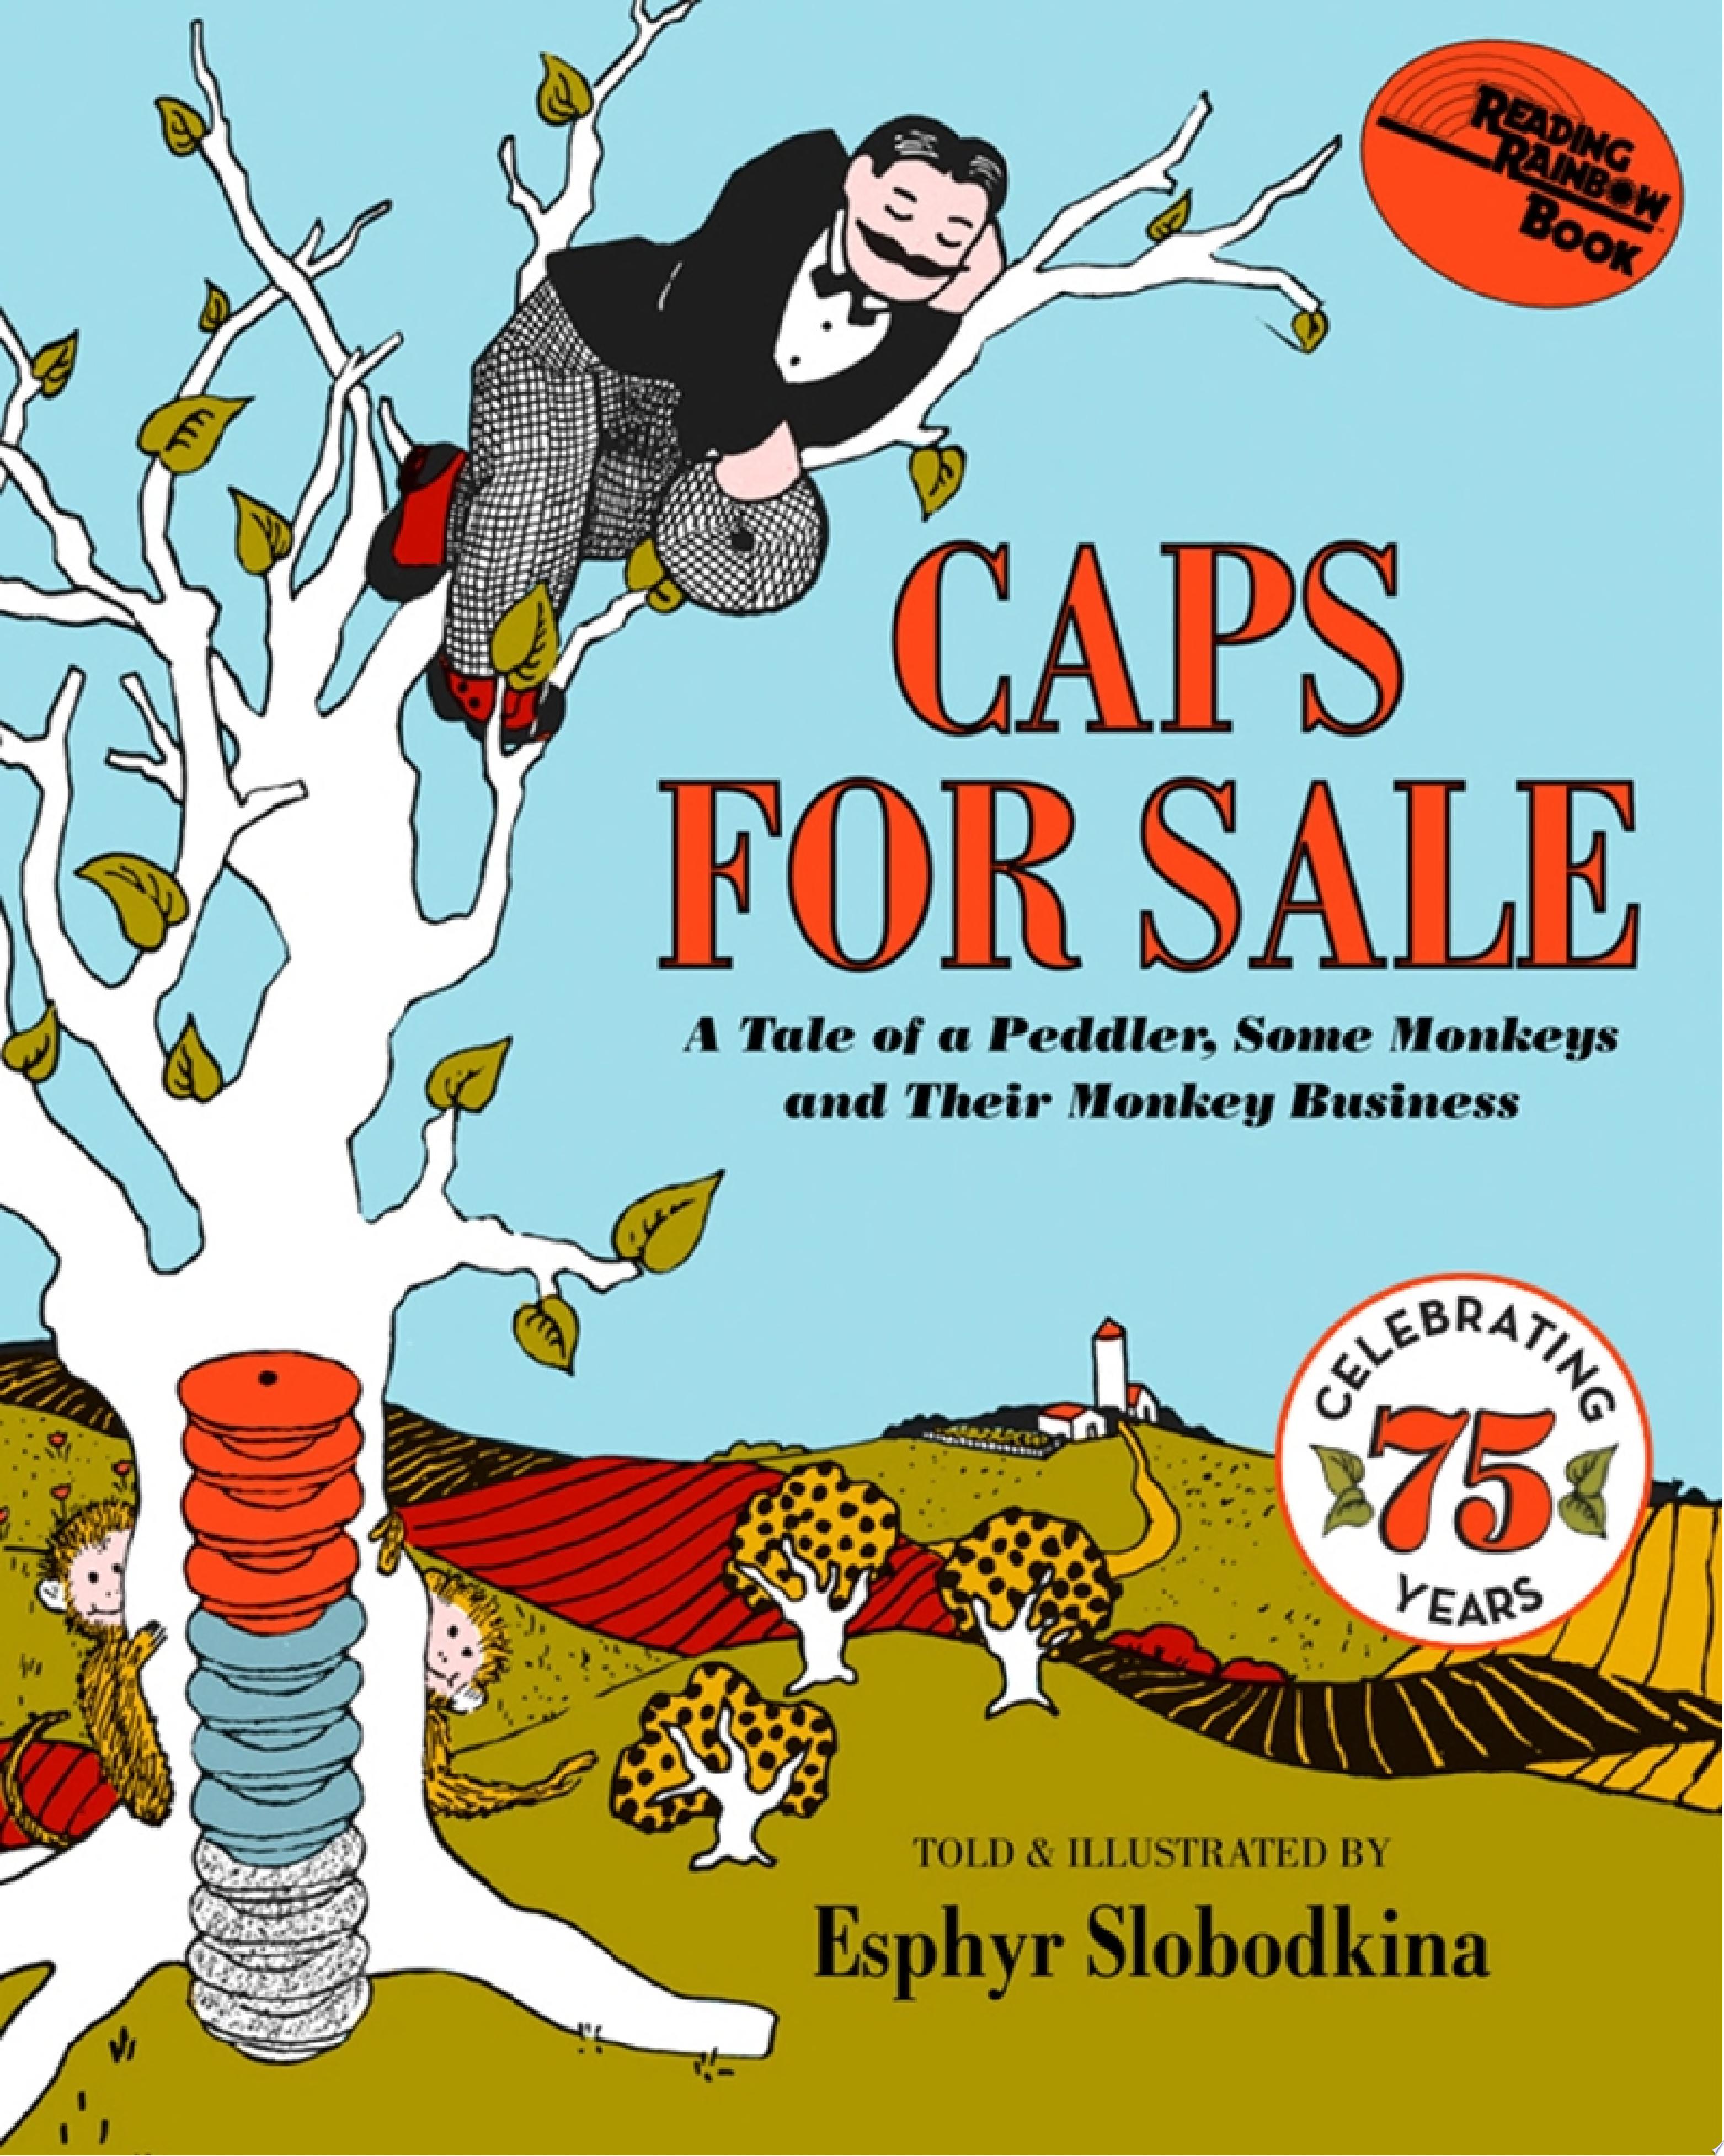 Image for "Caps for Sale"